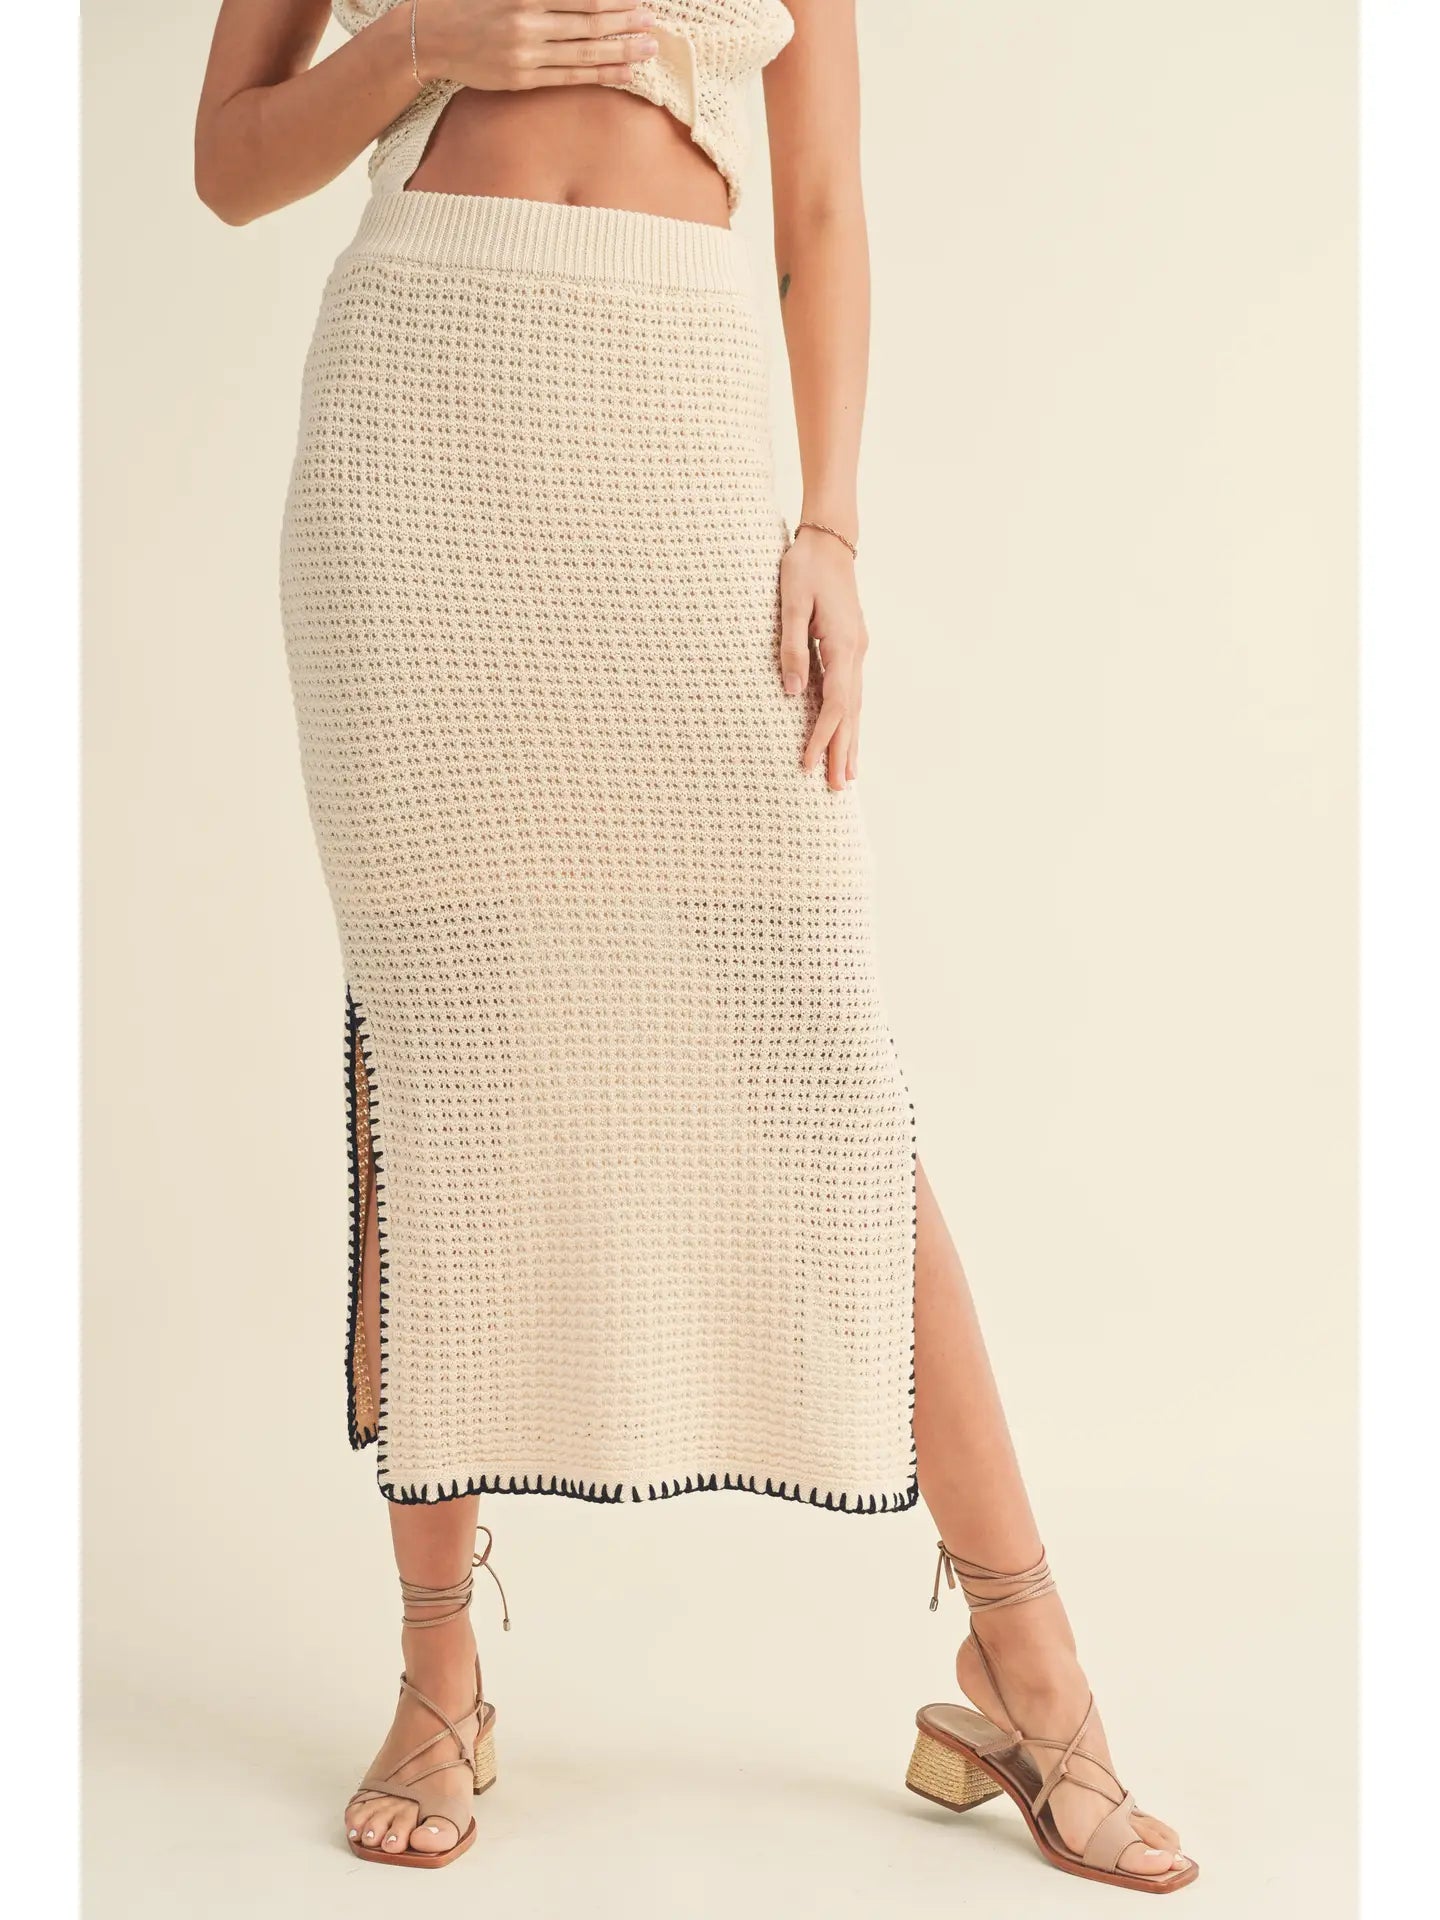 Crochet Knitted Skirt with Stitching Detail